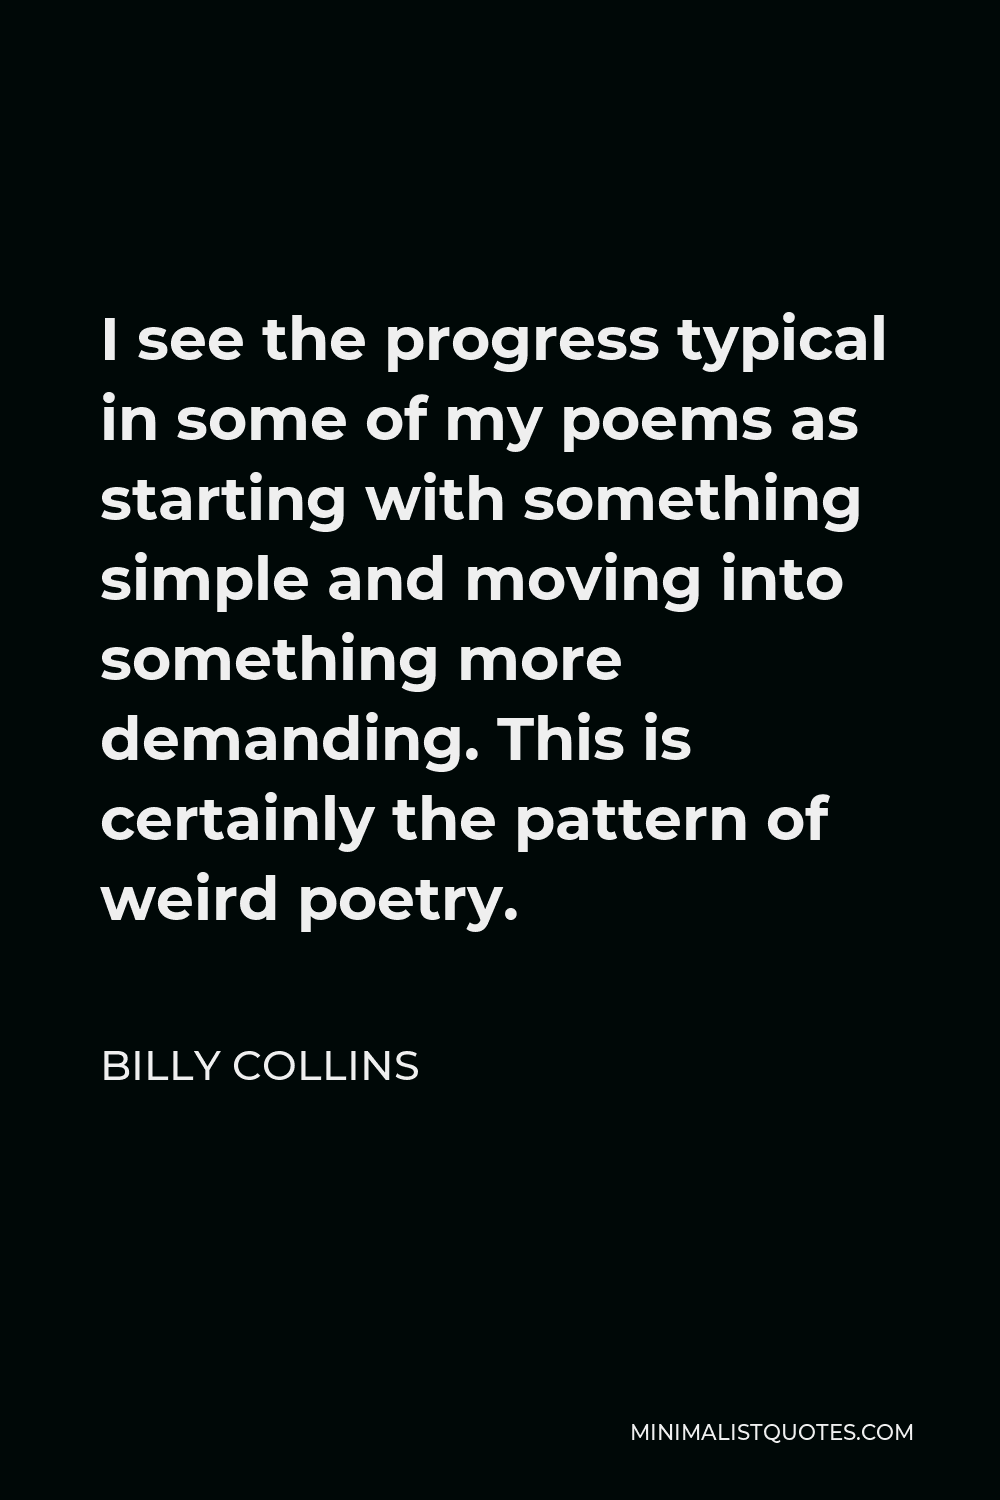 Billy Collins Quote - I see the progress typical in some of my poems as starting with something simple and moving into something more demanding. This is certainly the pattern of weird poetry.